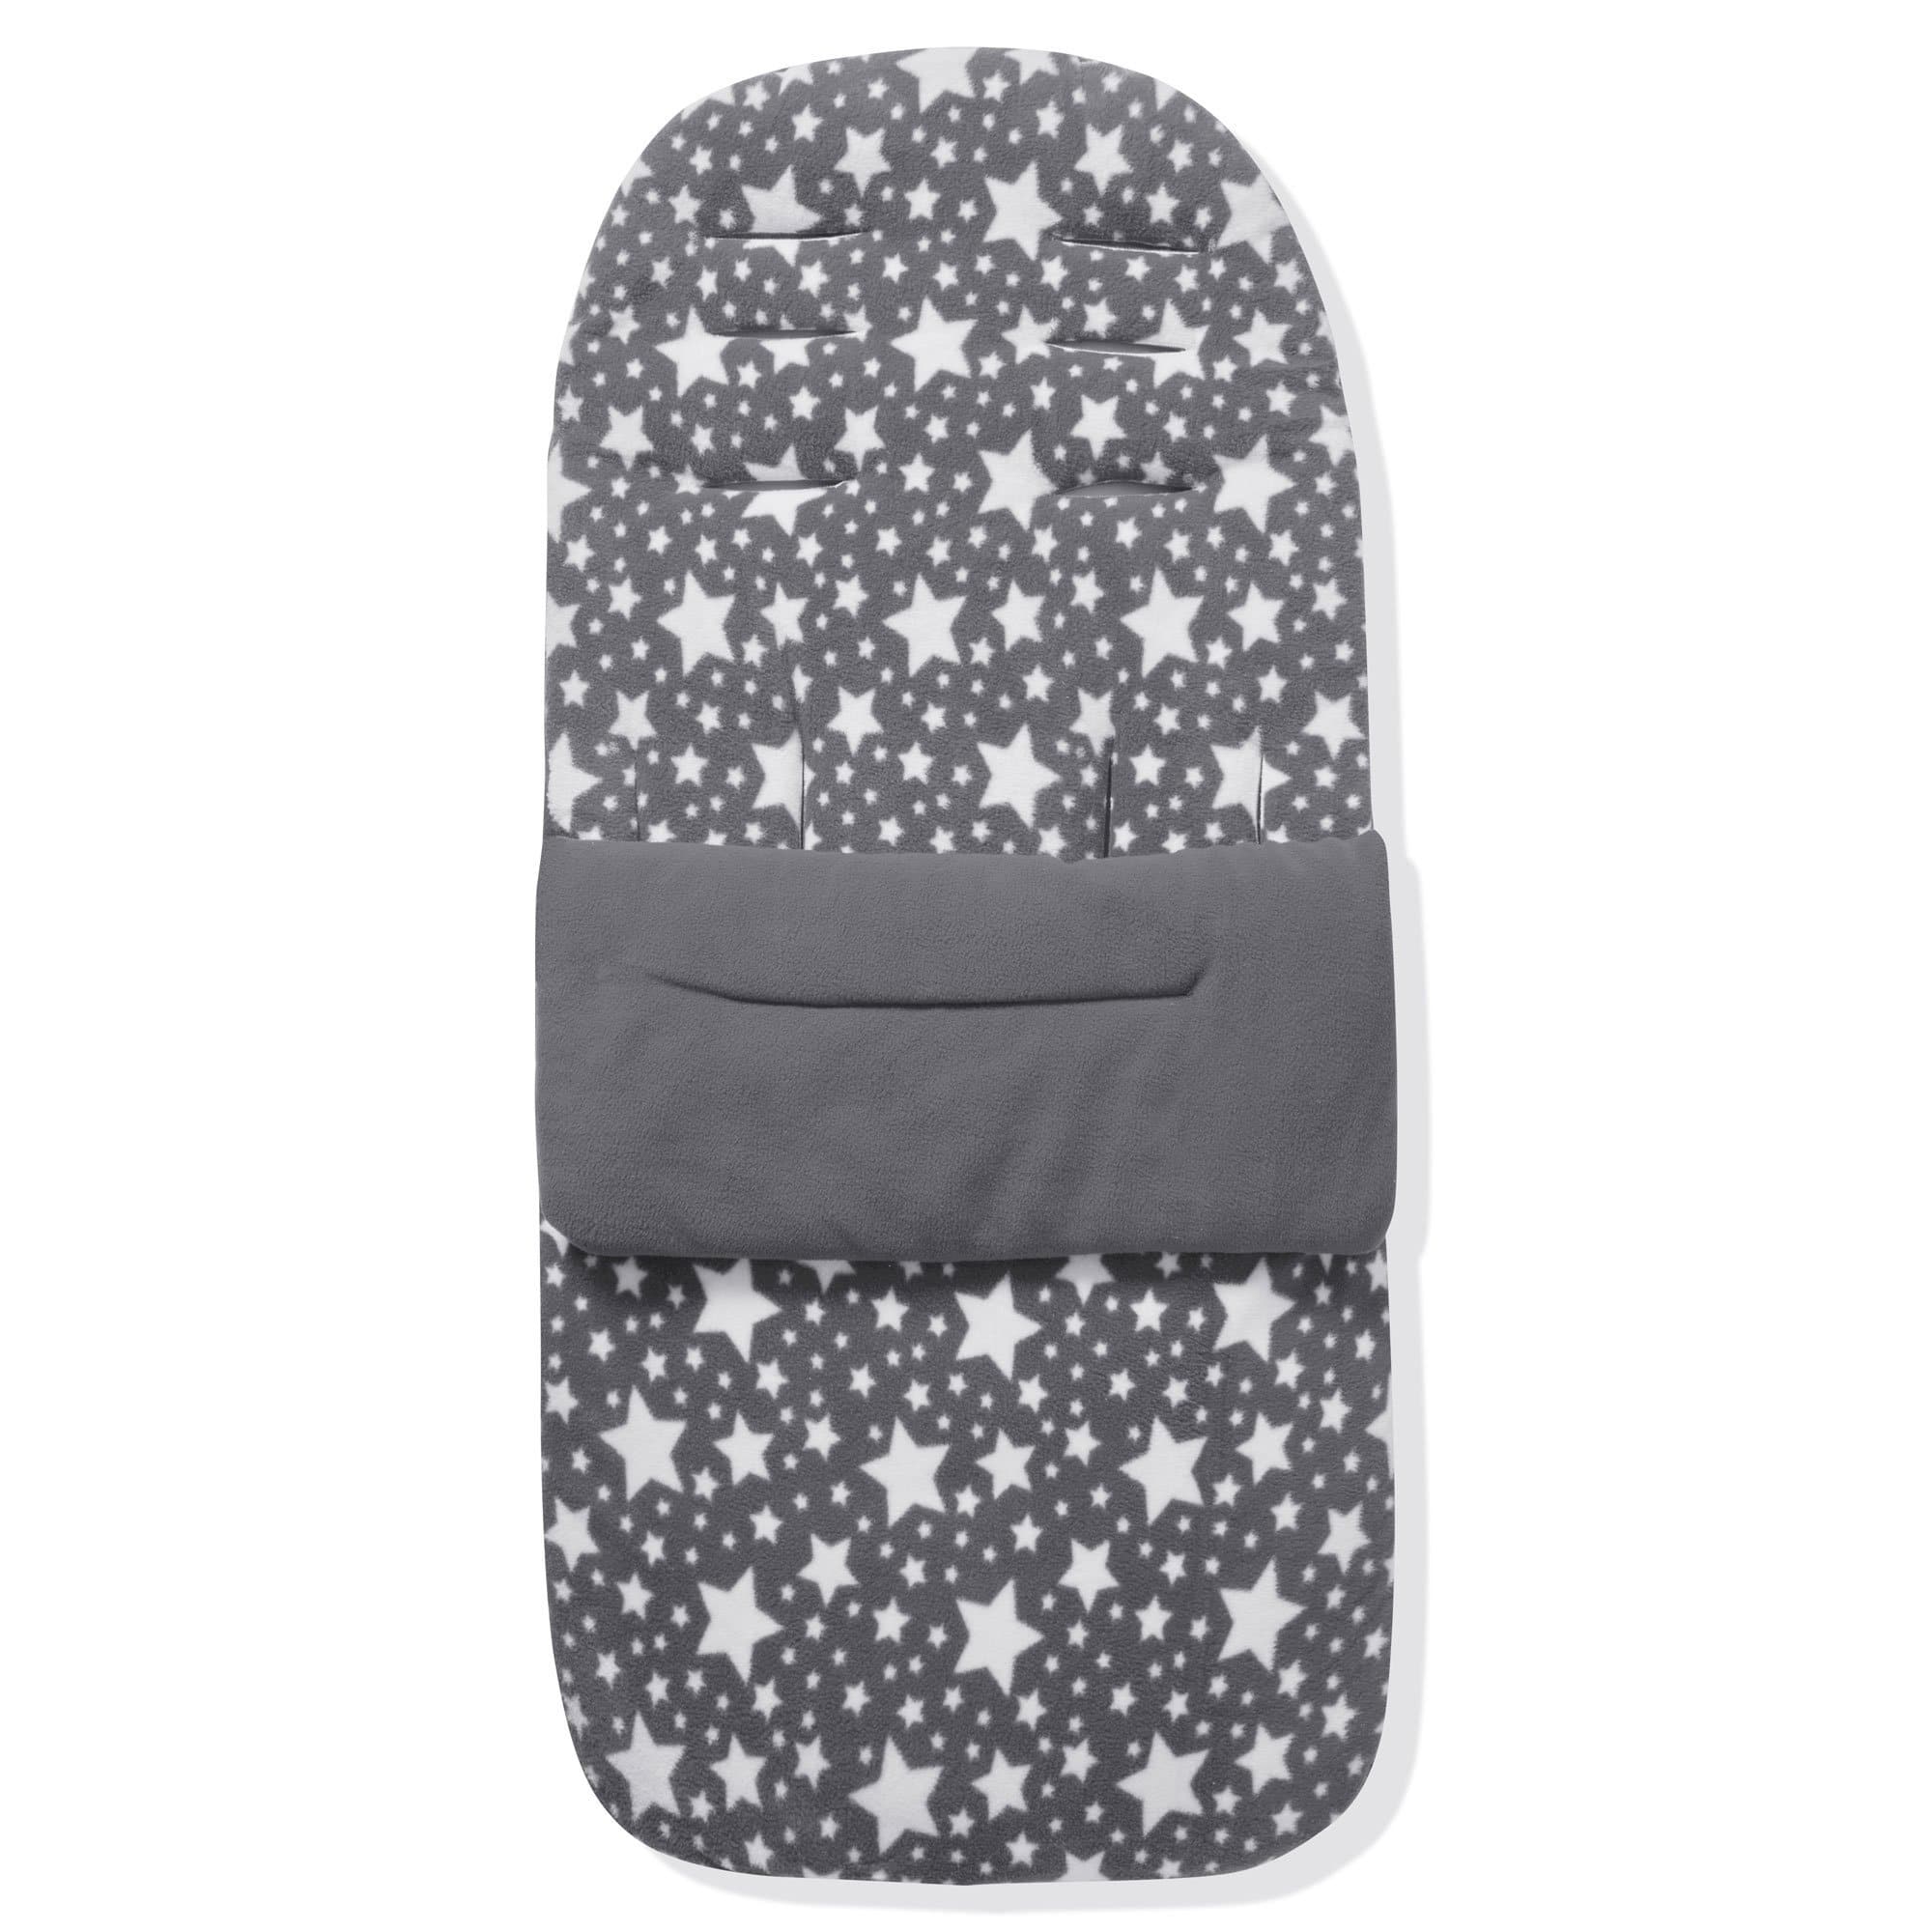 Fleece Footmuff / Cosy Toes Compatible with NeoNato - For Your Little One